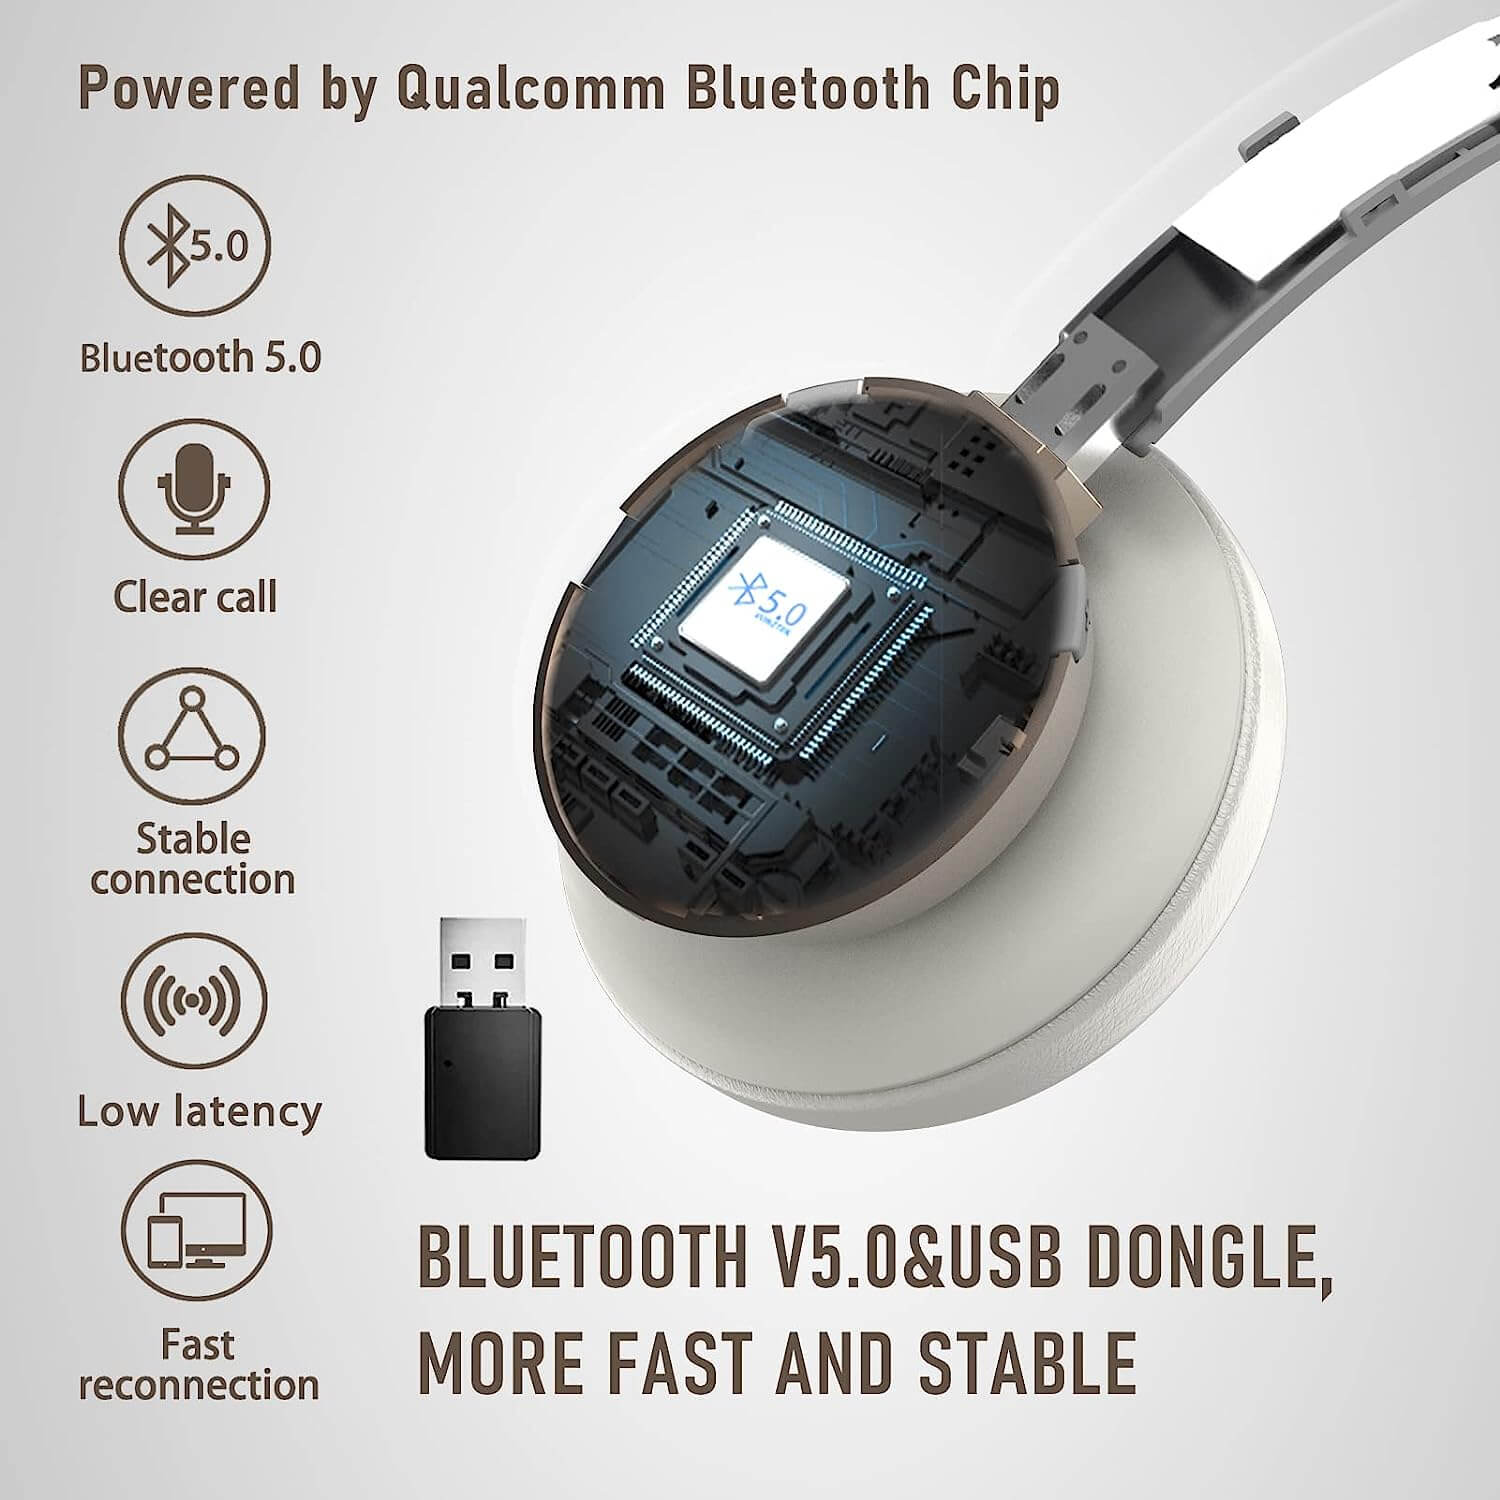 Powered by qualcomm bluetooth chip,Bluetooth 5.0,Clear call,Stable connection,Low latency,Fast reconnection,Bluetooth V5.0 & USB dongle,More fast and stable.